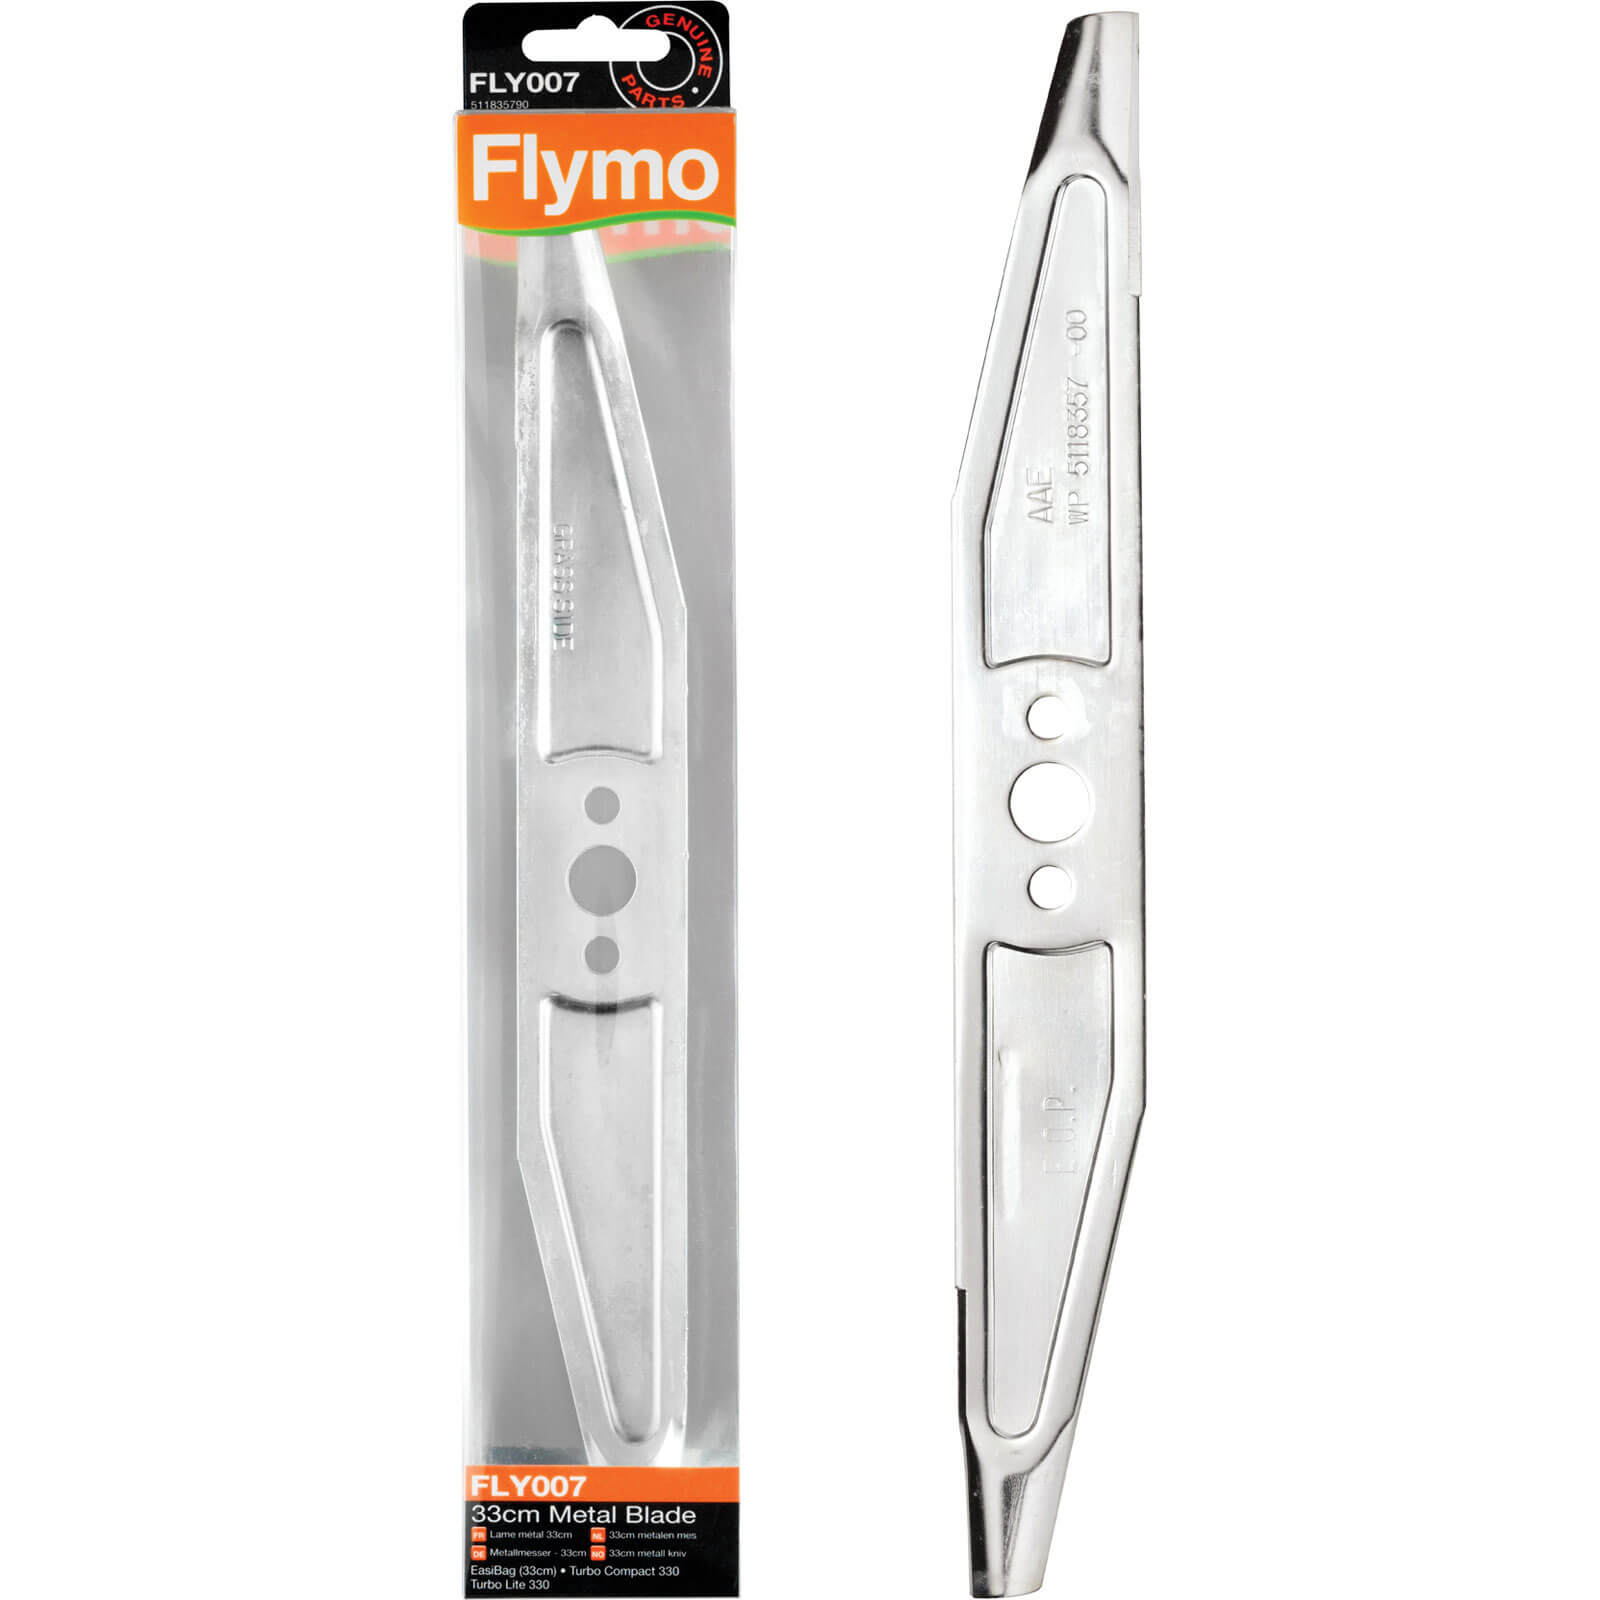 Flymo FLY007 Genuine Blade for TC330, TCV330, VC330, TL330 Lawnmowers 330mm Pack of 1